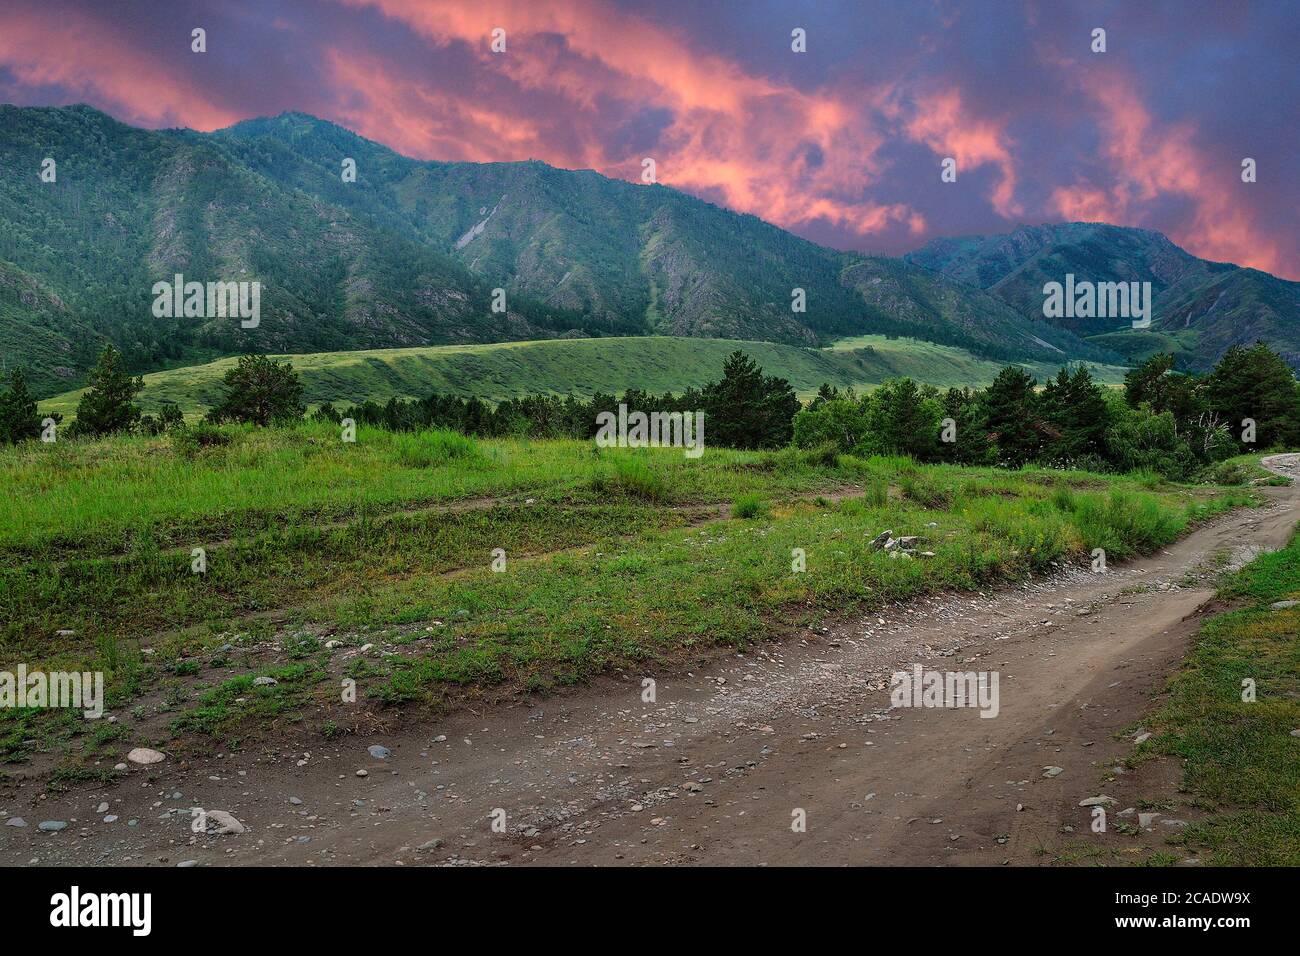 Crimson sunset over Altai mountains with forest covered, dirty curved road leading through green valley. Beautiful evening summer mountain landscape w Stock Photo